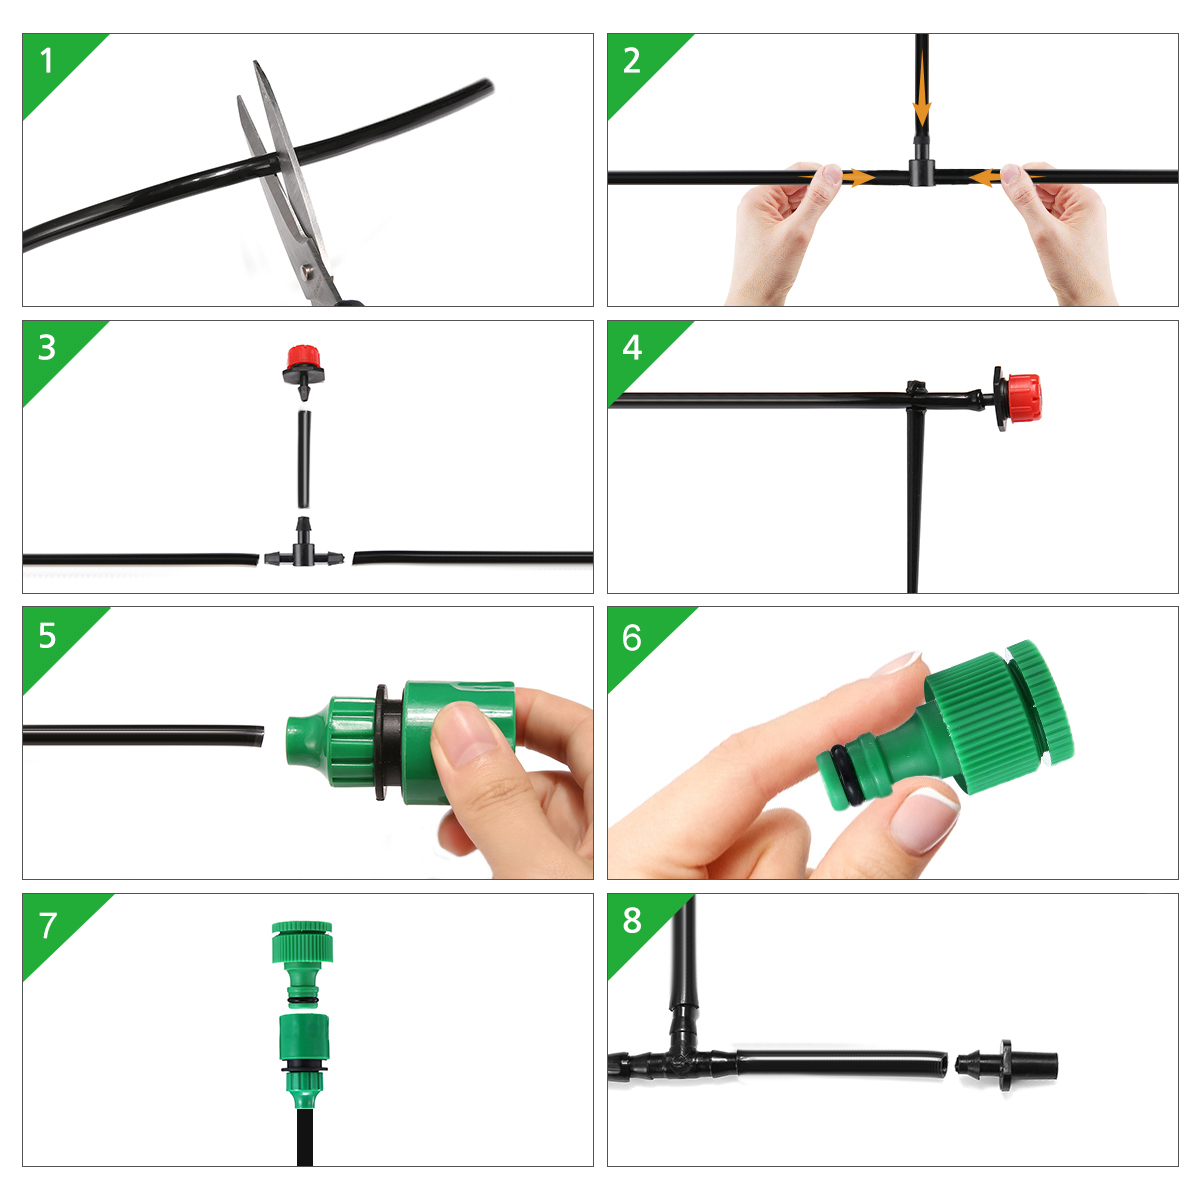 15M-Micro-Drip-Irrigation-Kit-Drip-UV-resistant-Automatic-Irrigation-System-for-Greenhouse-Garden-Pa-1884007-6